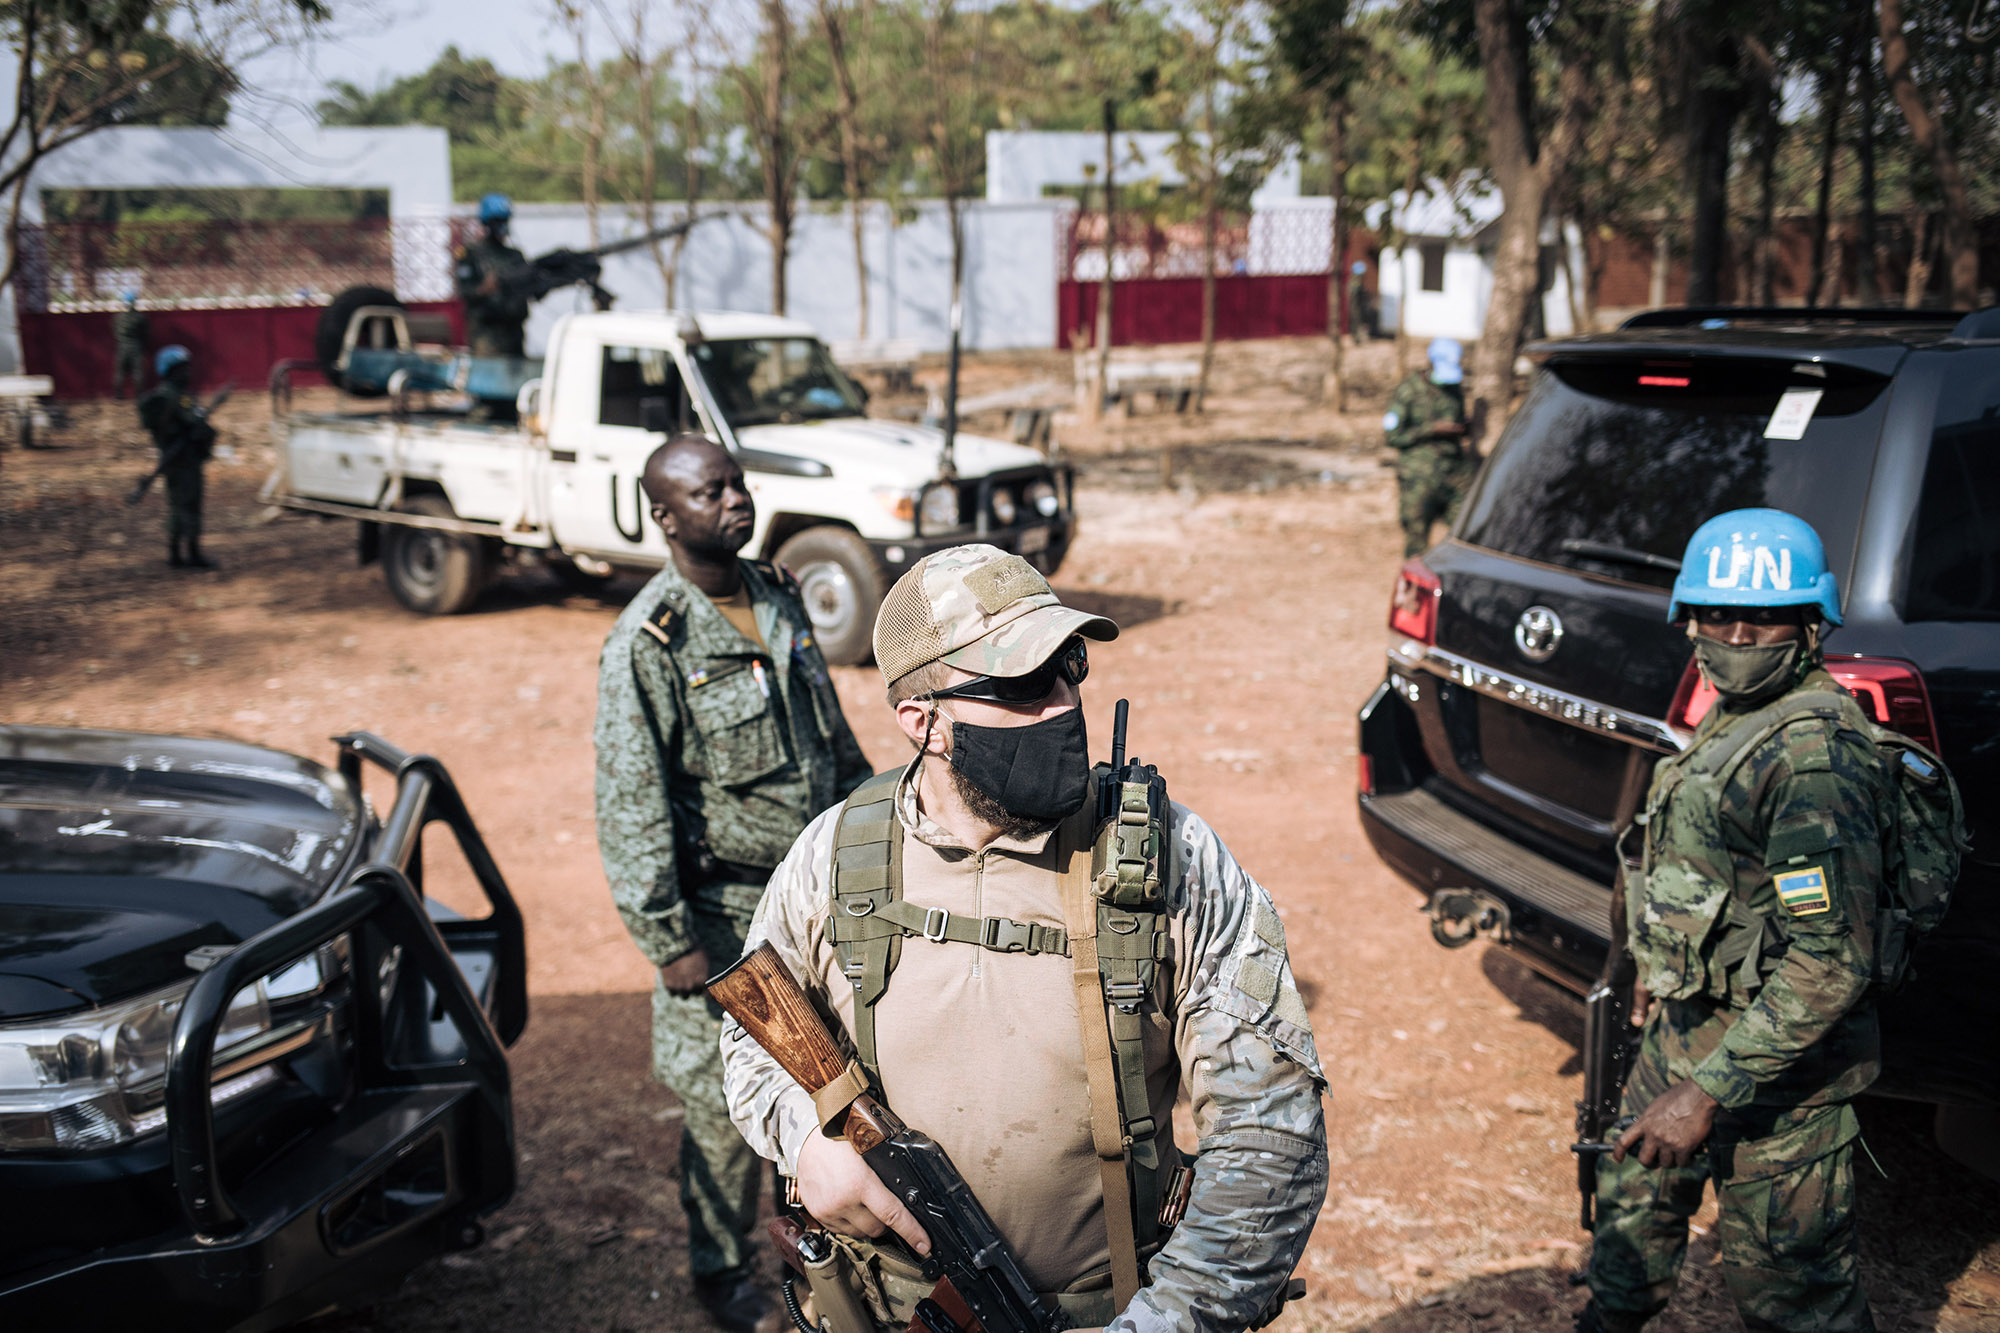 West, Russia Clash Over Russian Mercenaries in Central African Republic pic